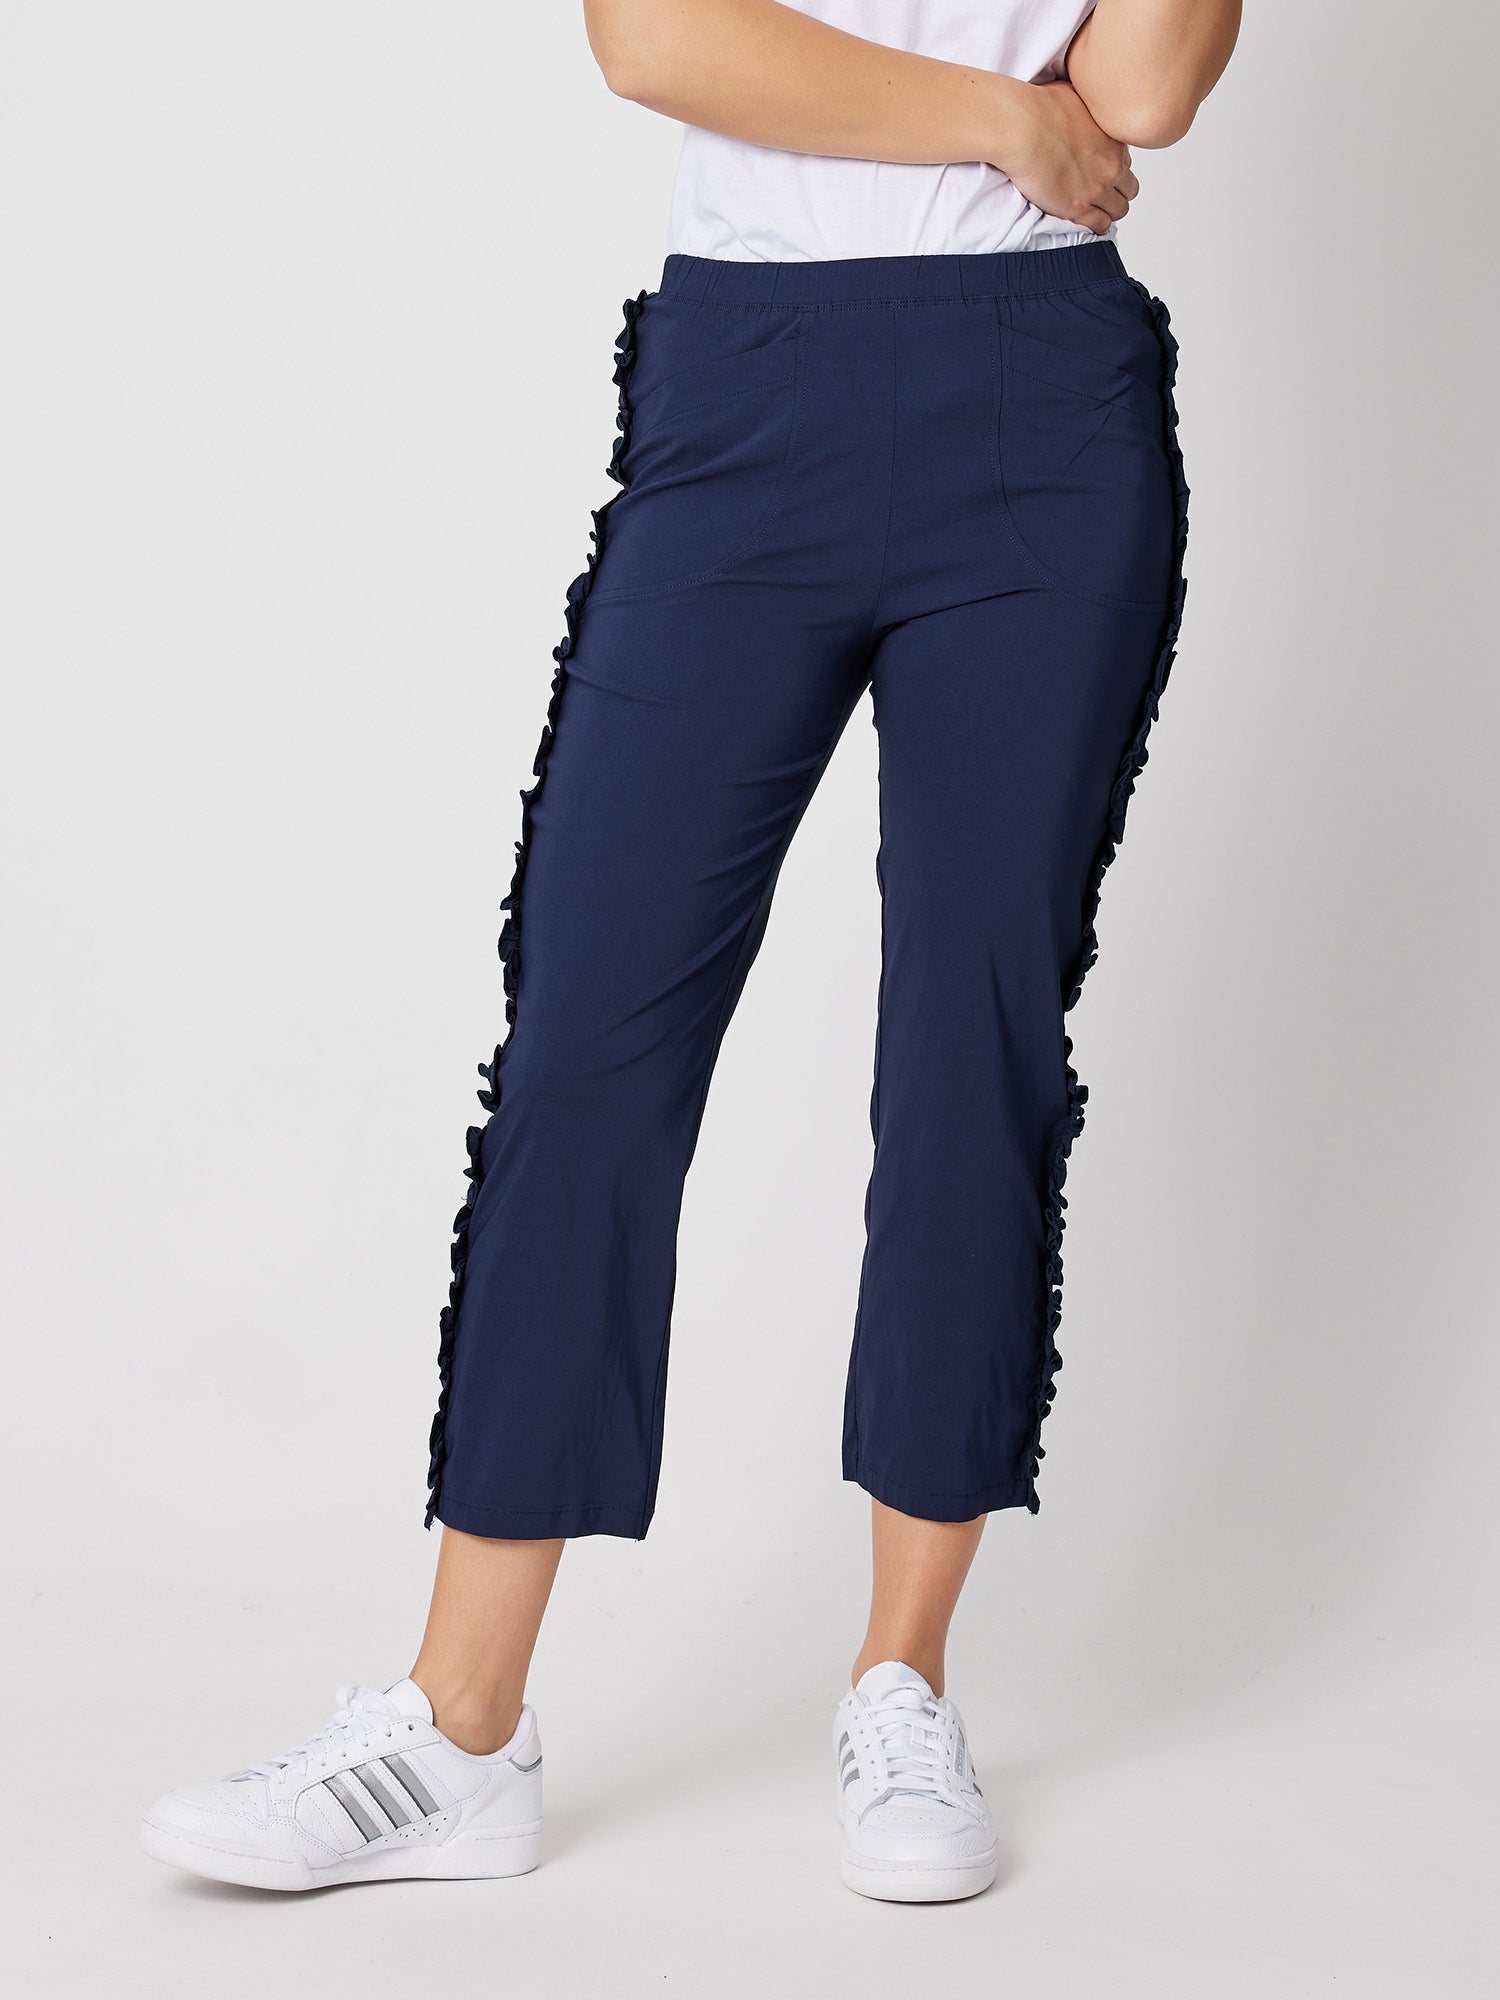 Frilled Side Detail Stretch Pant - Navy